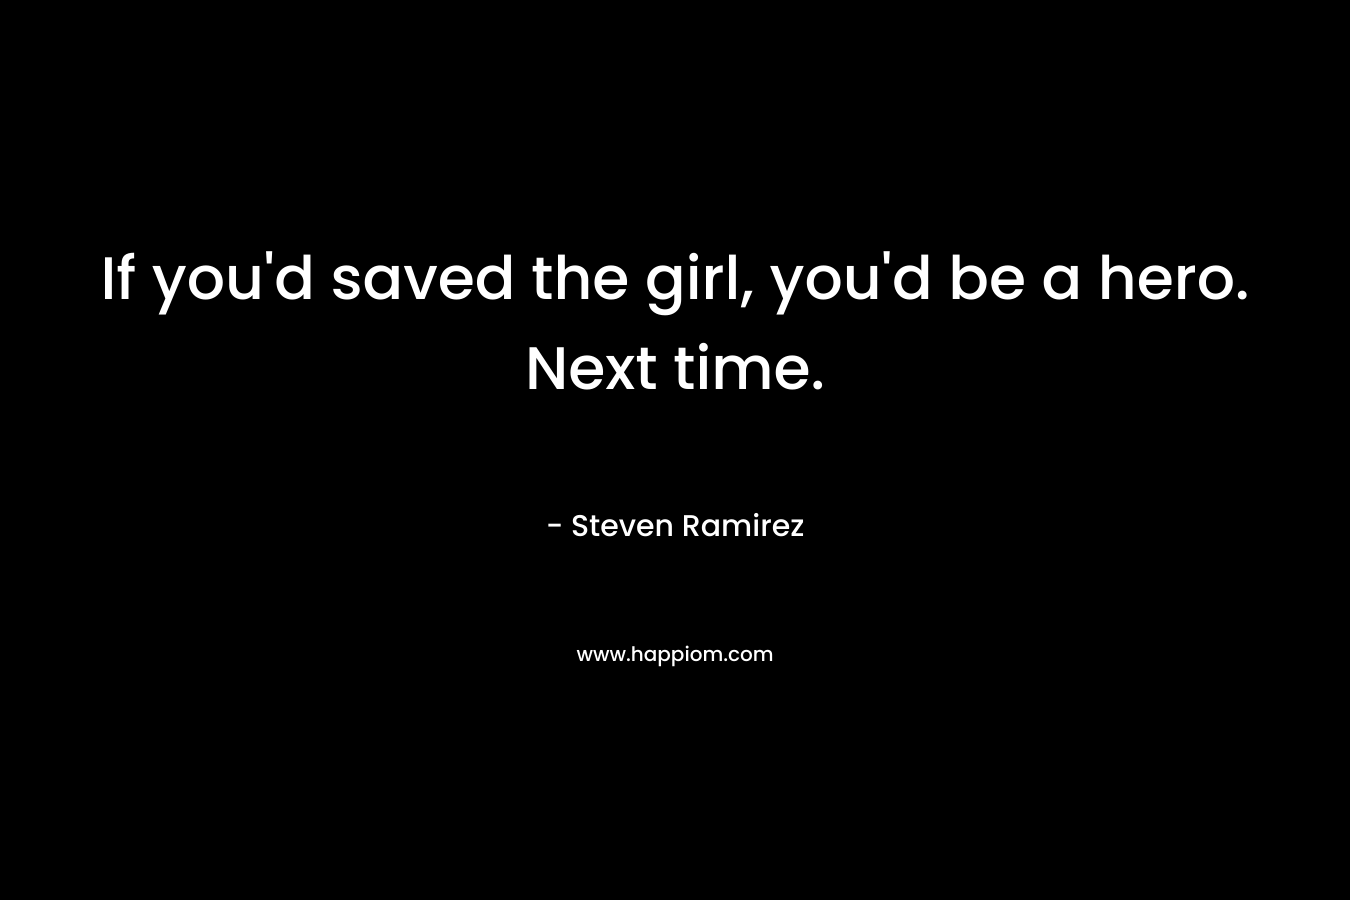 If you'd saved the girl, you'd be a hero. Next time.